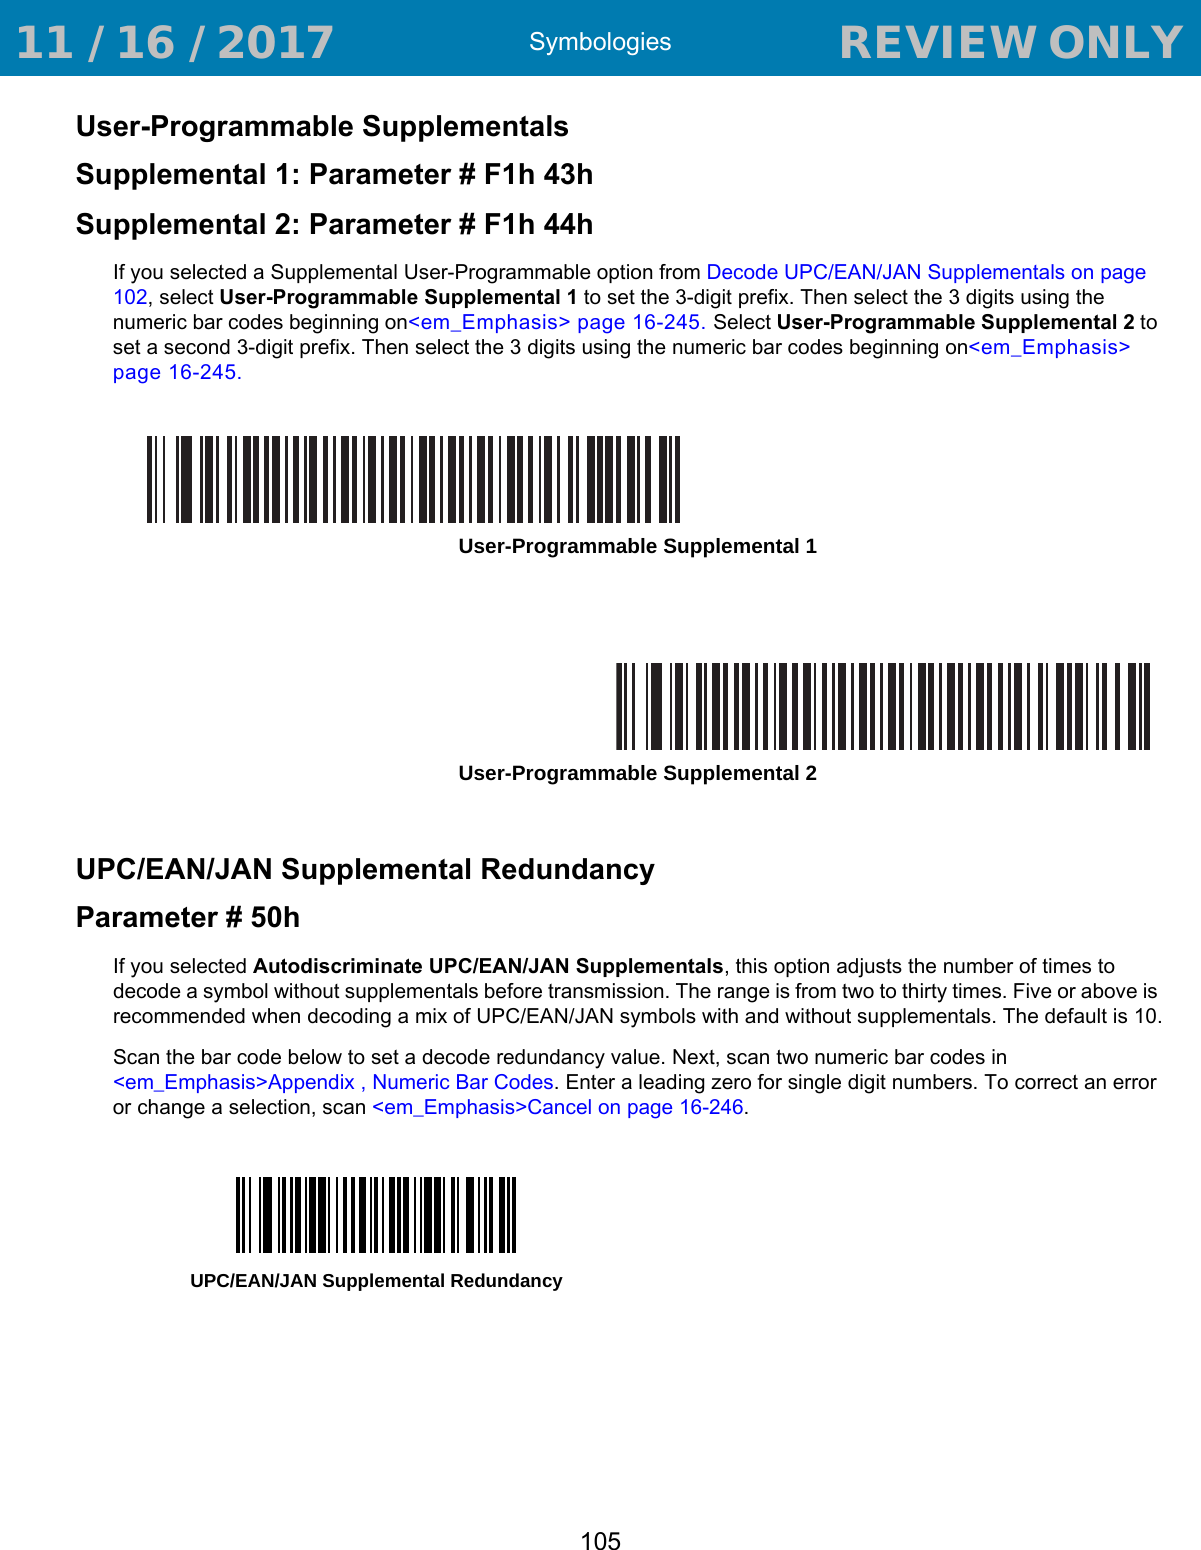 Symbologies105User-Programmable SupplementalsSupplemental 1: Parameter # F1h 43hSupplemental 2: Parameter # F1h 44hIf you selected a Supplemental User-Programmable option from Decode UPC/EAN/JAN Supplementals on page 102, select User-Programmable Supplemental 1 to set the 3-digit prefix. Then select the 3 digits using the numeric bar codes beginning on&lt;em_Emphasis&gt; page 16-245. Select User-Programmable Supplemental 2 to set a second 3-digit prefix. Then select the 3 digits using the numeric bar codes beginning on&lt;em_Emphasis&gt; page 16-245.UPC/EAN/JAN Supplemental RedundancyParameter # 50hIf you selected Autodiscriminate UPC/EAN/JAN Supplementals, this option adjusts the number of times to decode a symbol without supplementals before transmission. The range is from two to thirty times. Five or above is recommended when decoding a mix of UPC/EAN/JAN symbols with and without supplementals. The default is 10.Scan the bar code below to set a decode redundancy value. Next, scan two numeric bar codes in &lt;em_Emphasis&gt;Appendix , Numeric Bar Codes. Enter a leading zero for single digit numbers. To correct an error or change a selection, scan &lt;em_Emphasis&gt;Cancel on page 16-246.User-Programmable Supplemental 1User-Programmable Supplemental 2UPC/EAN/JAN Supplemental Redundancy 11 / 16 / 2017                                  REVIEW ONLY                             REVIEW ONLY - REVIEW ONLY - REVIEW ONLY